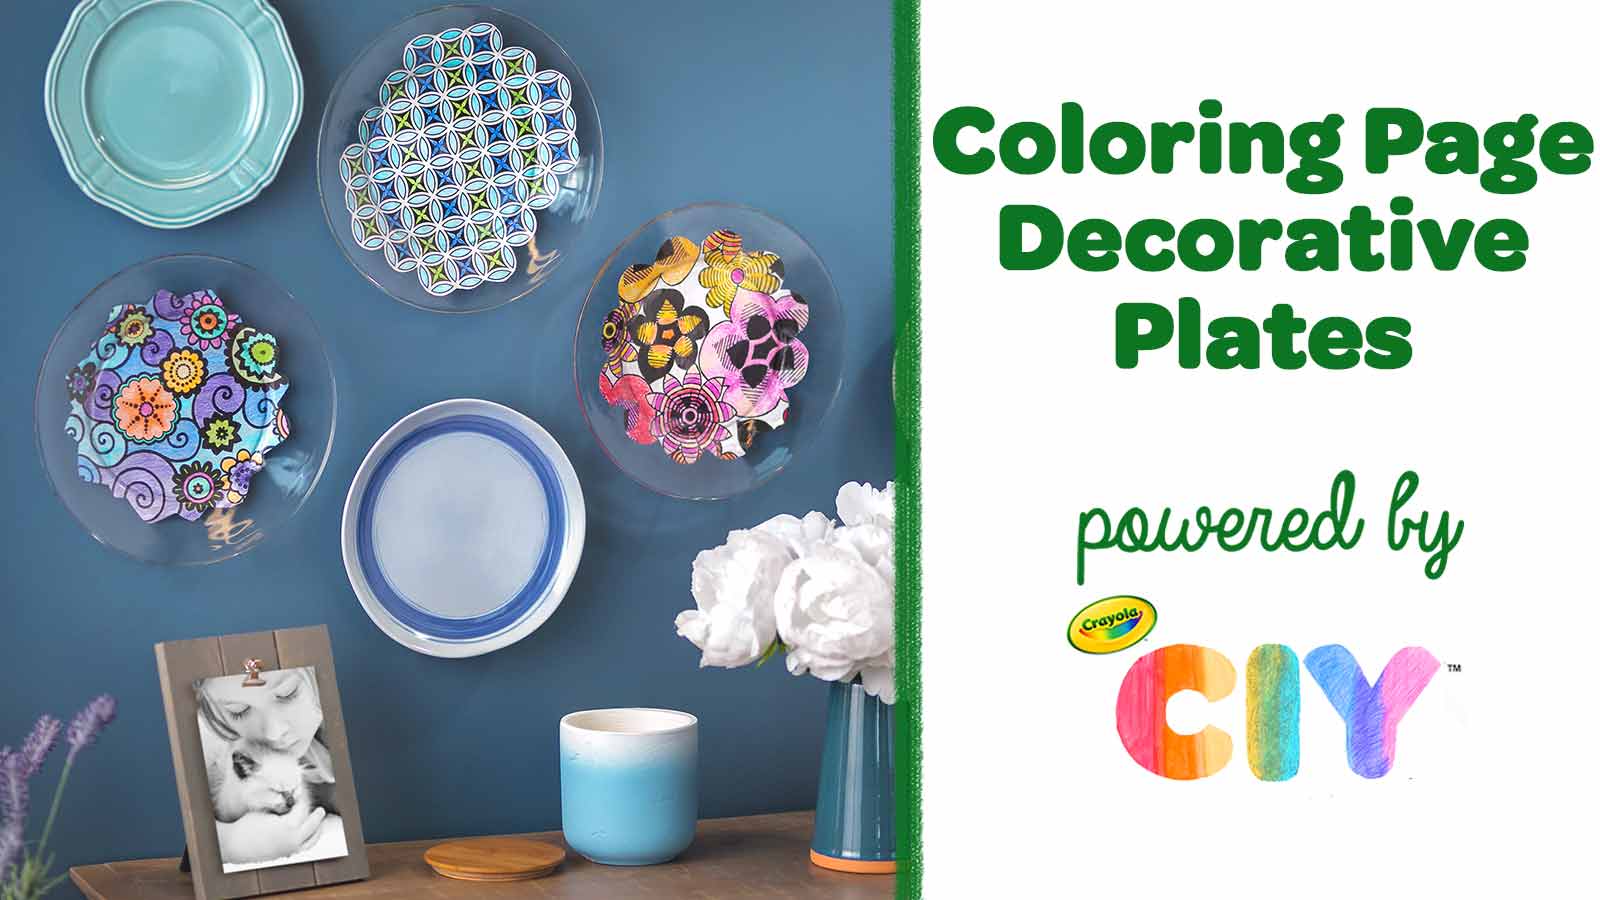 Coloring Page Decorative Plates CIY Video Poster Frame